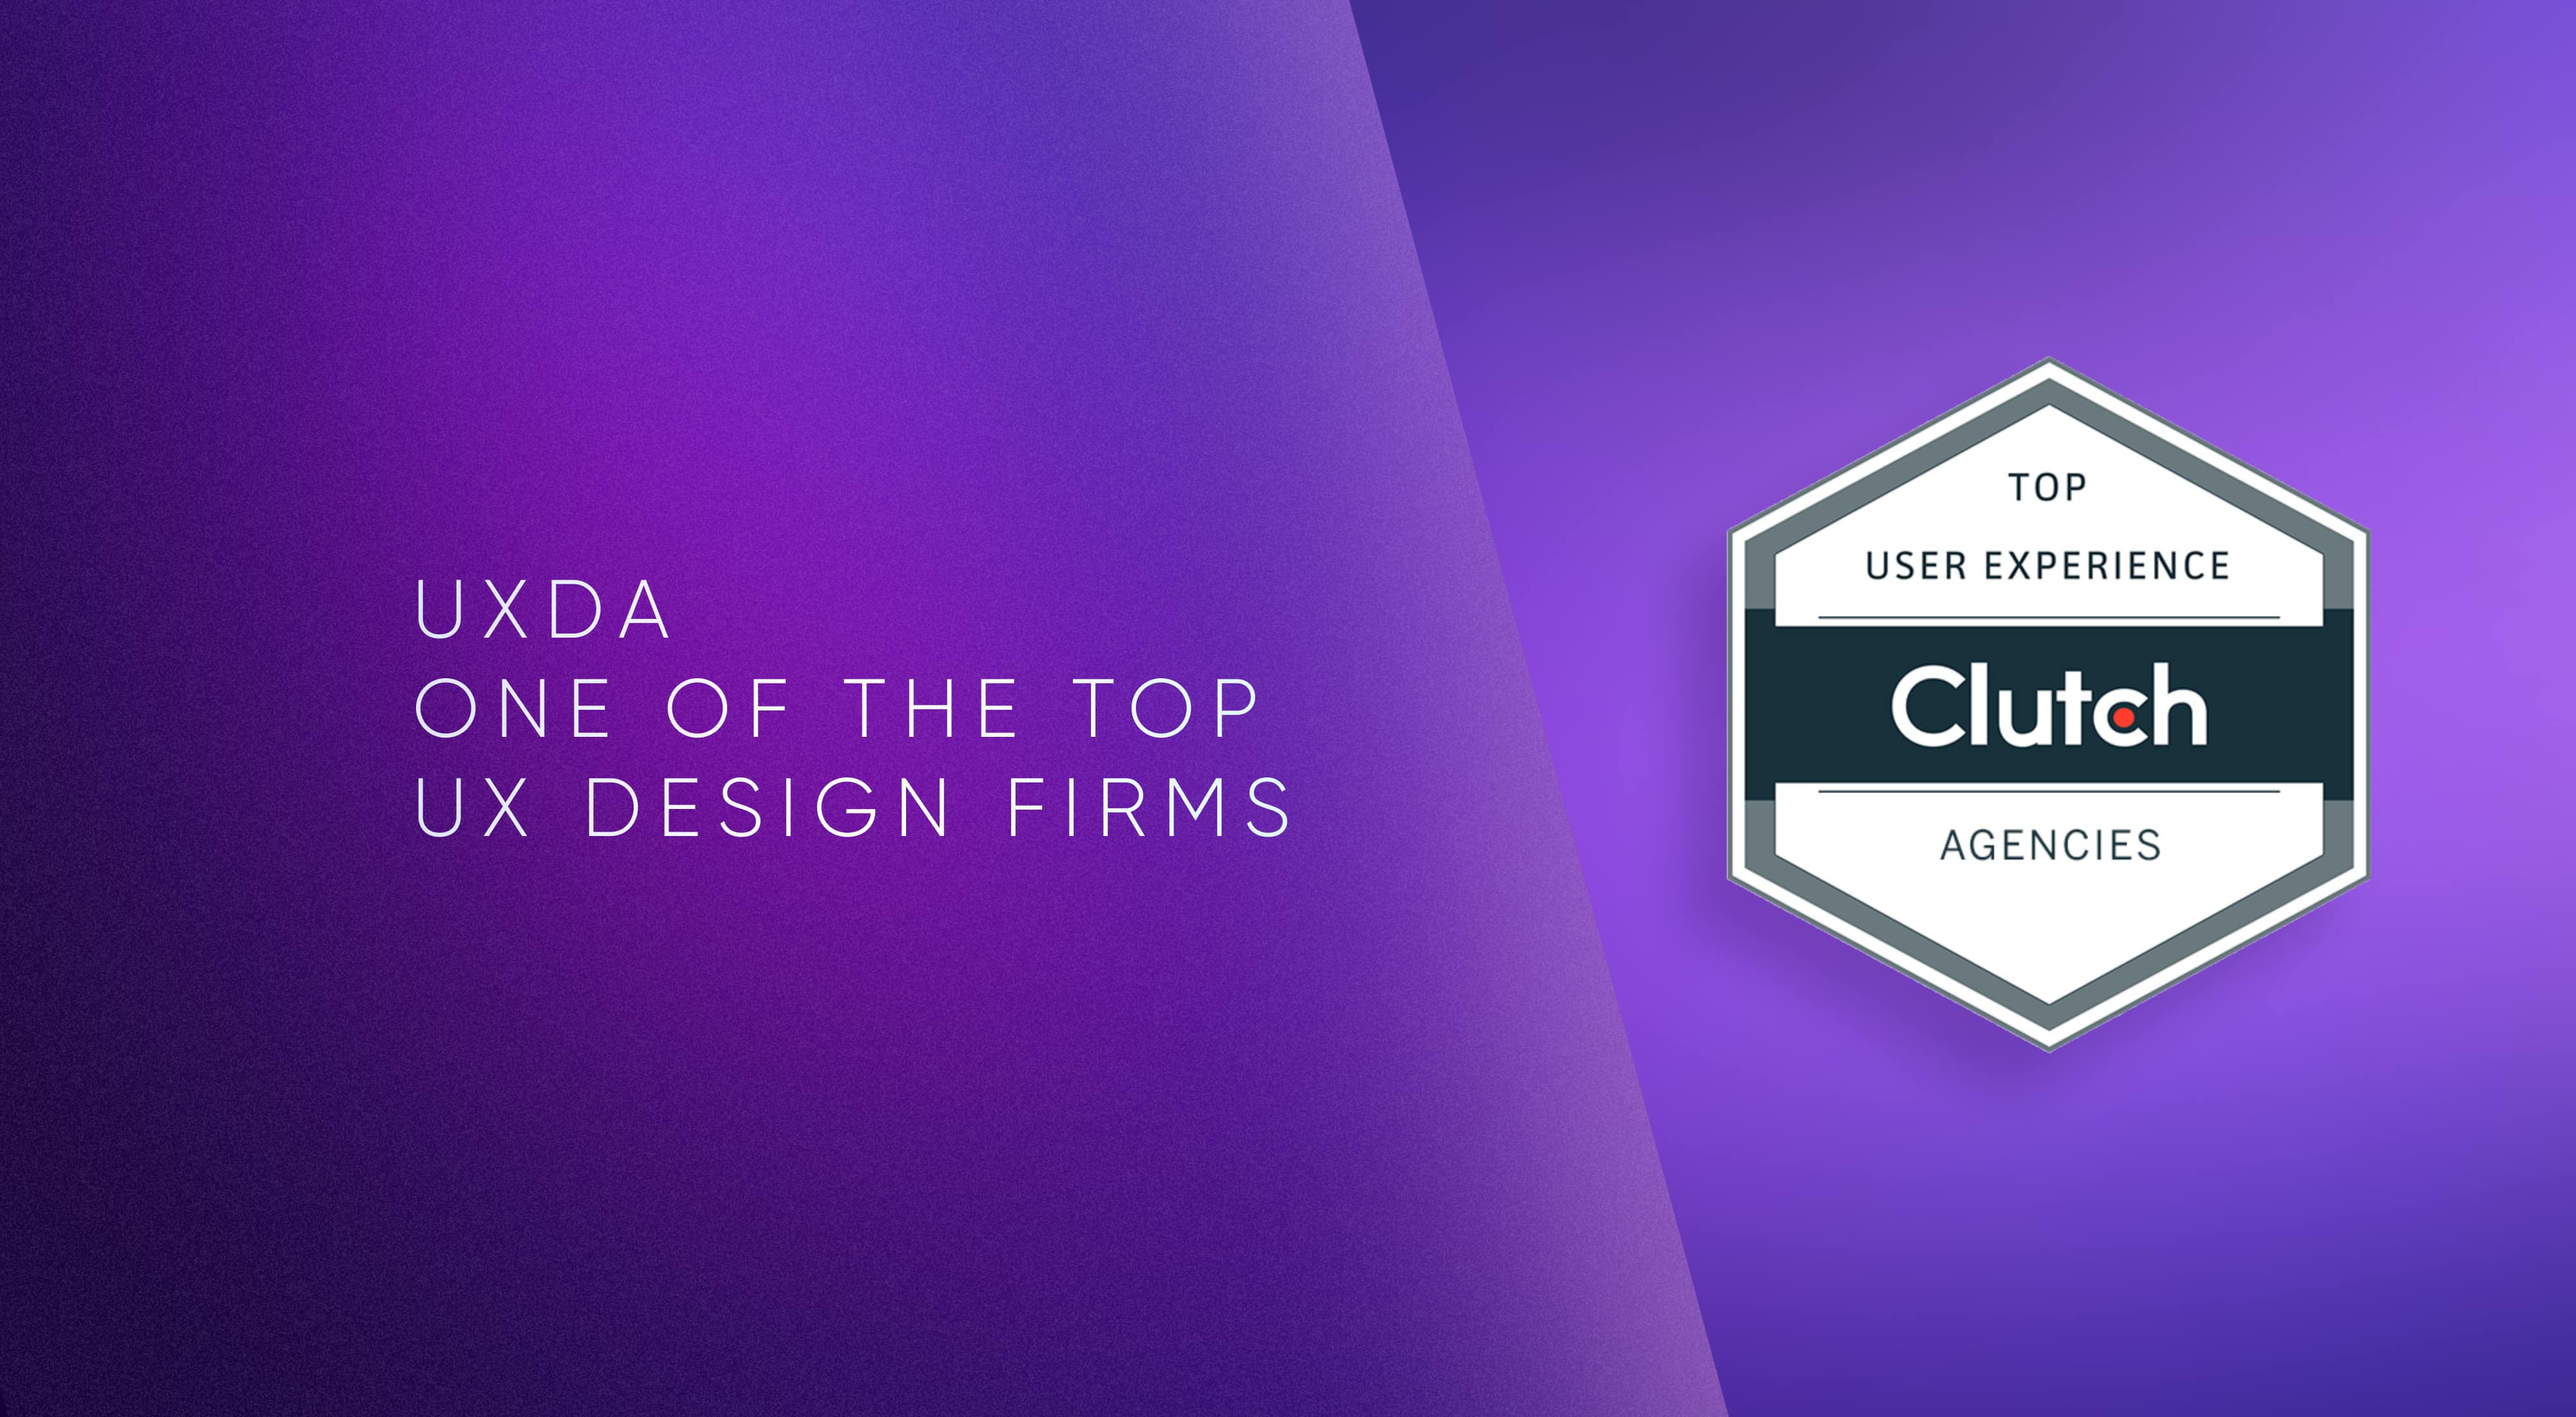 UXDA Named One of the TOP UX Design Firms by the Manifest